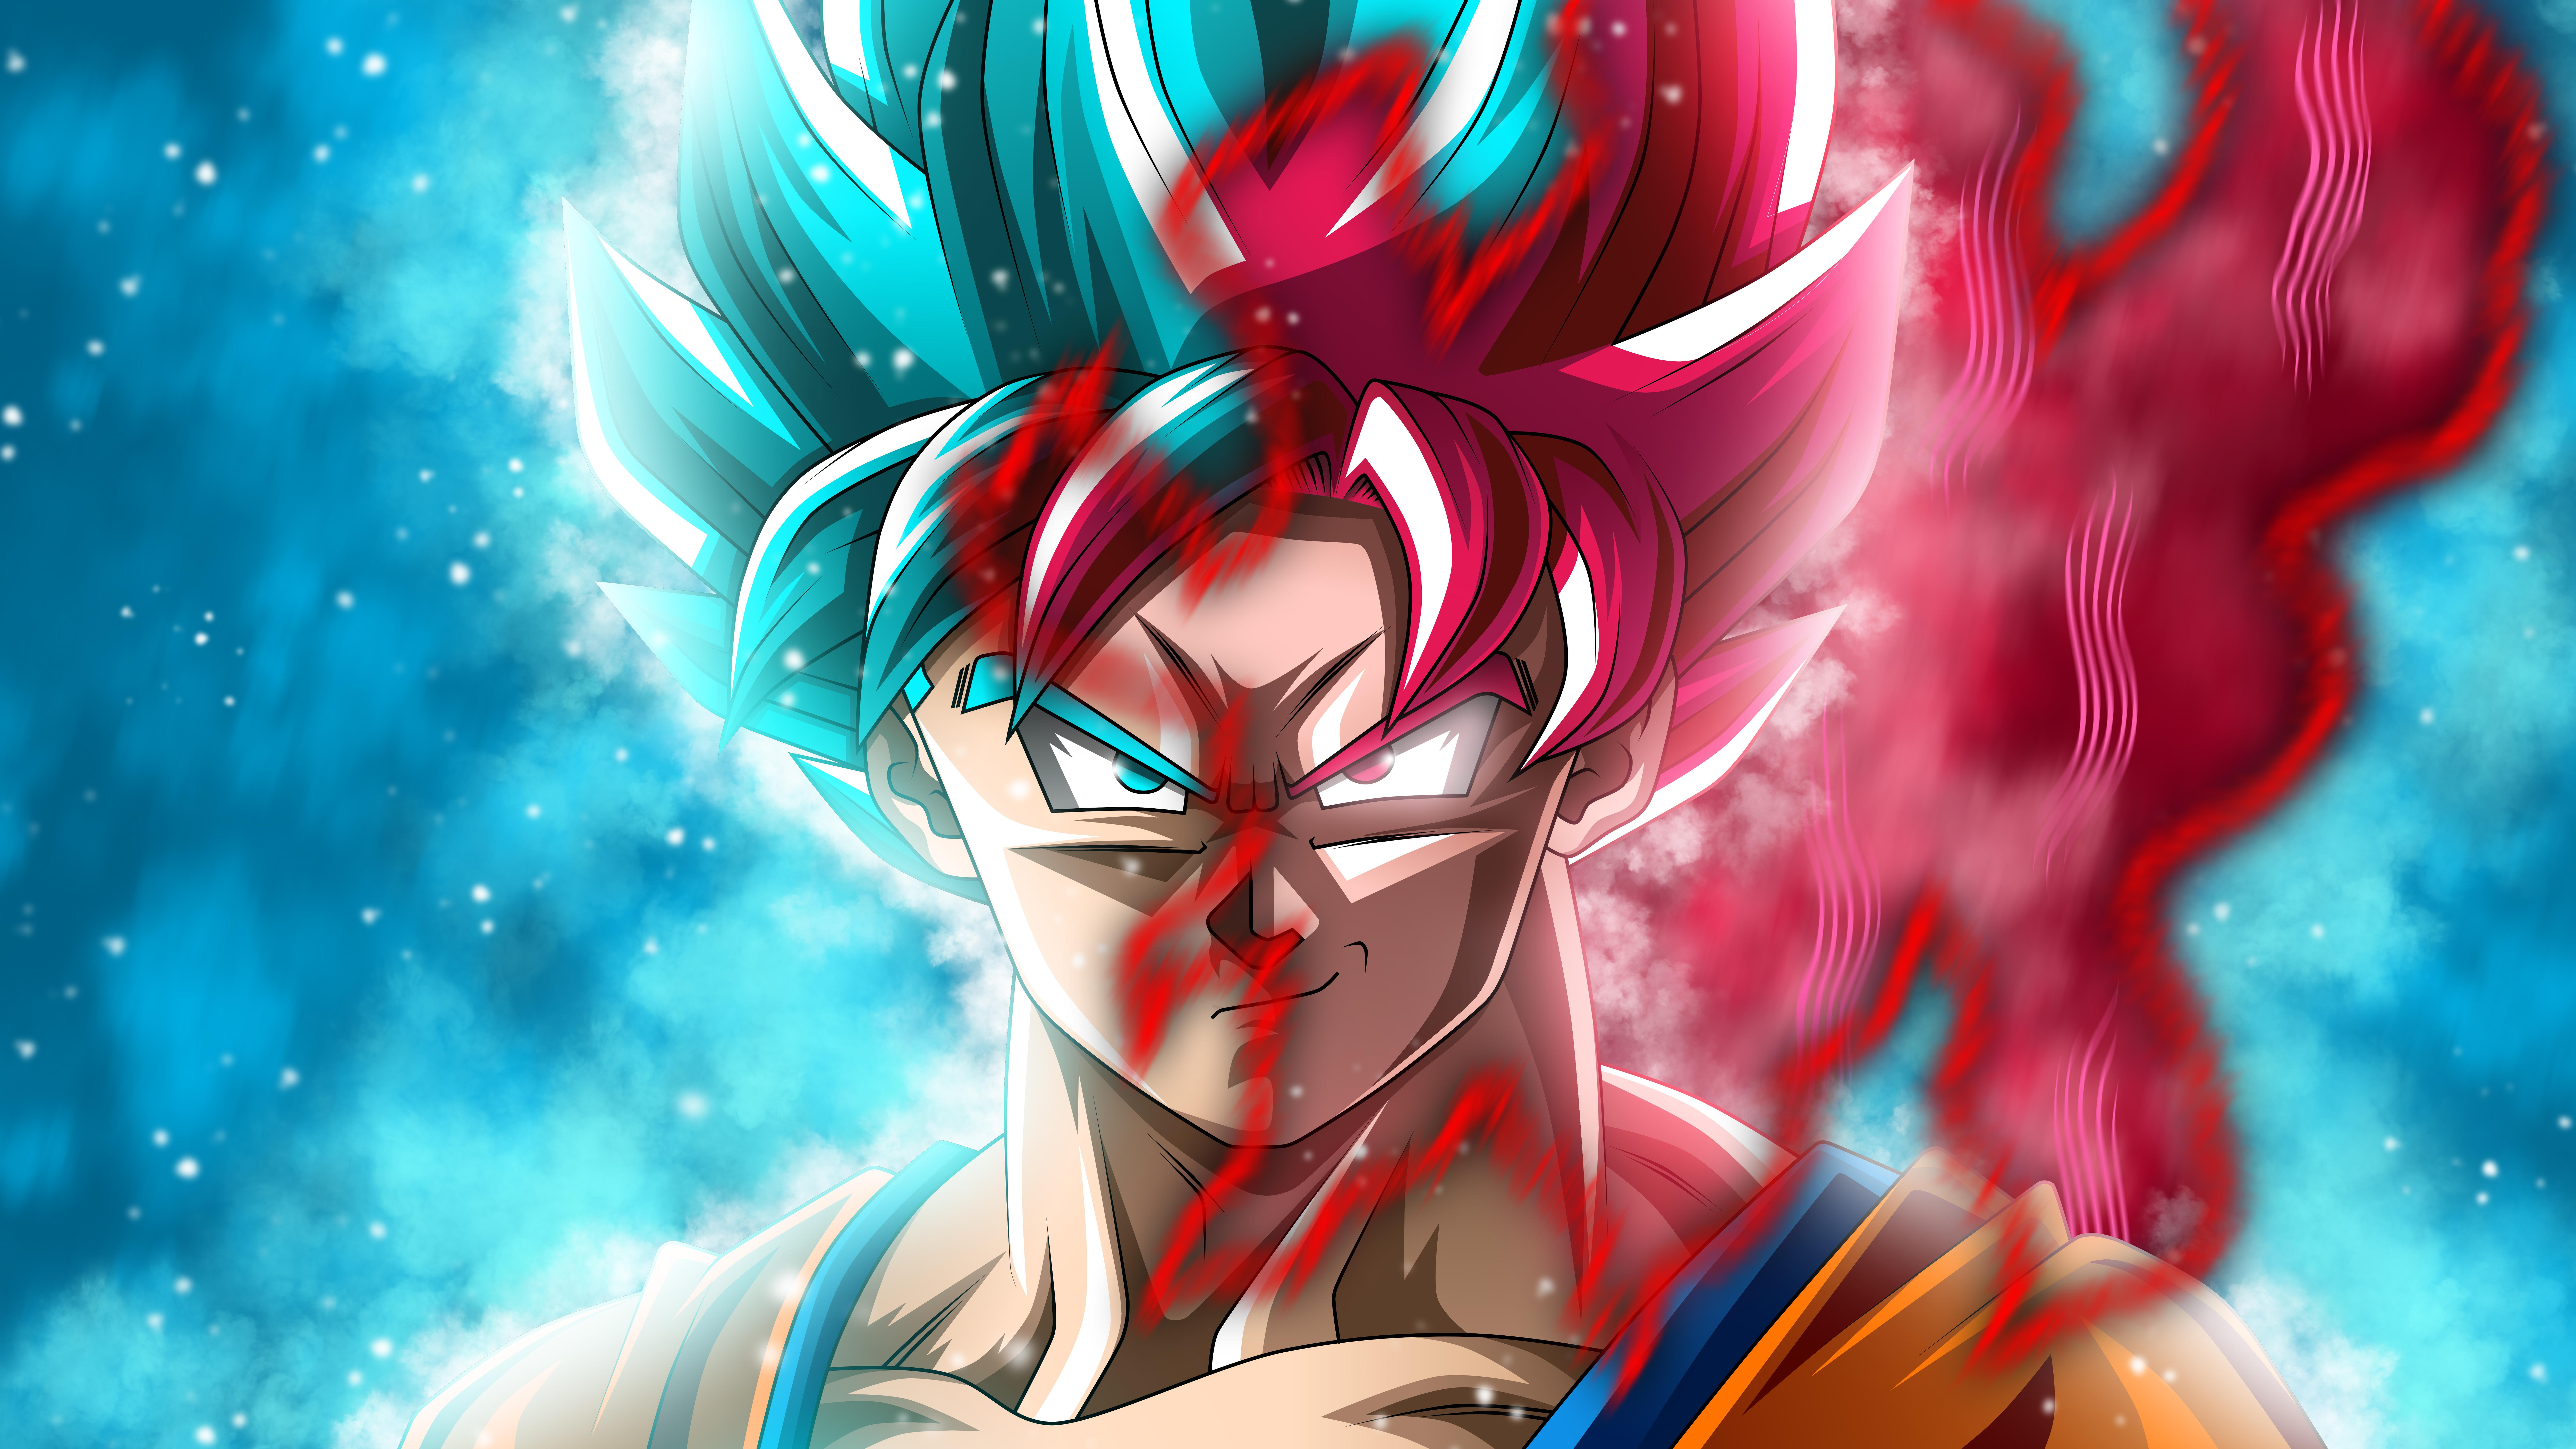 Red and Blue Goku Wallpaper Free Red and Blue Goku Background